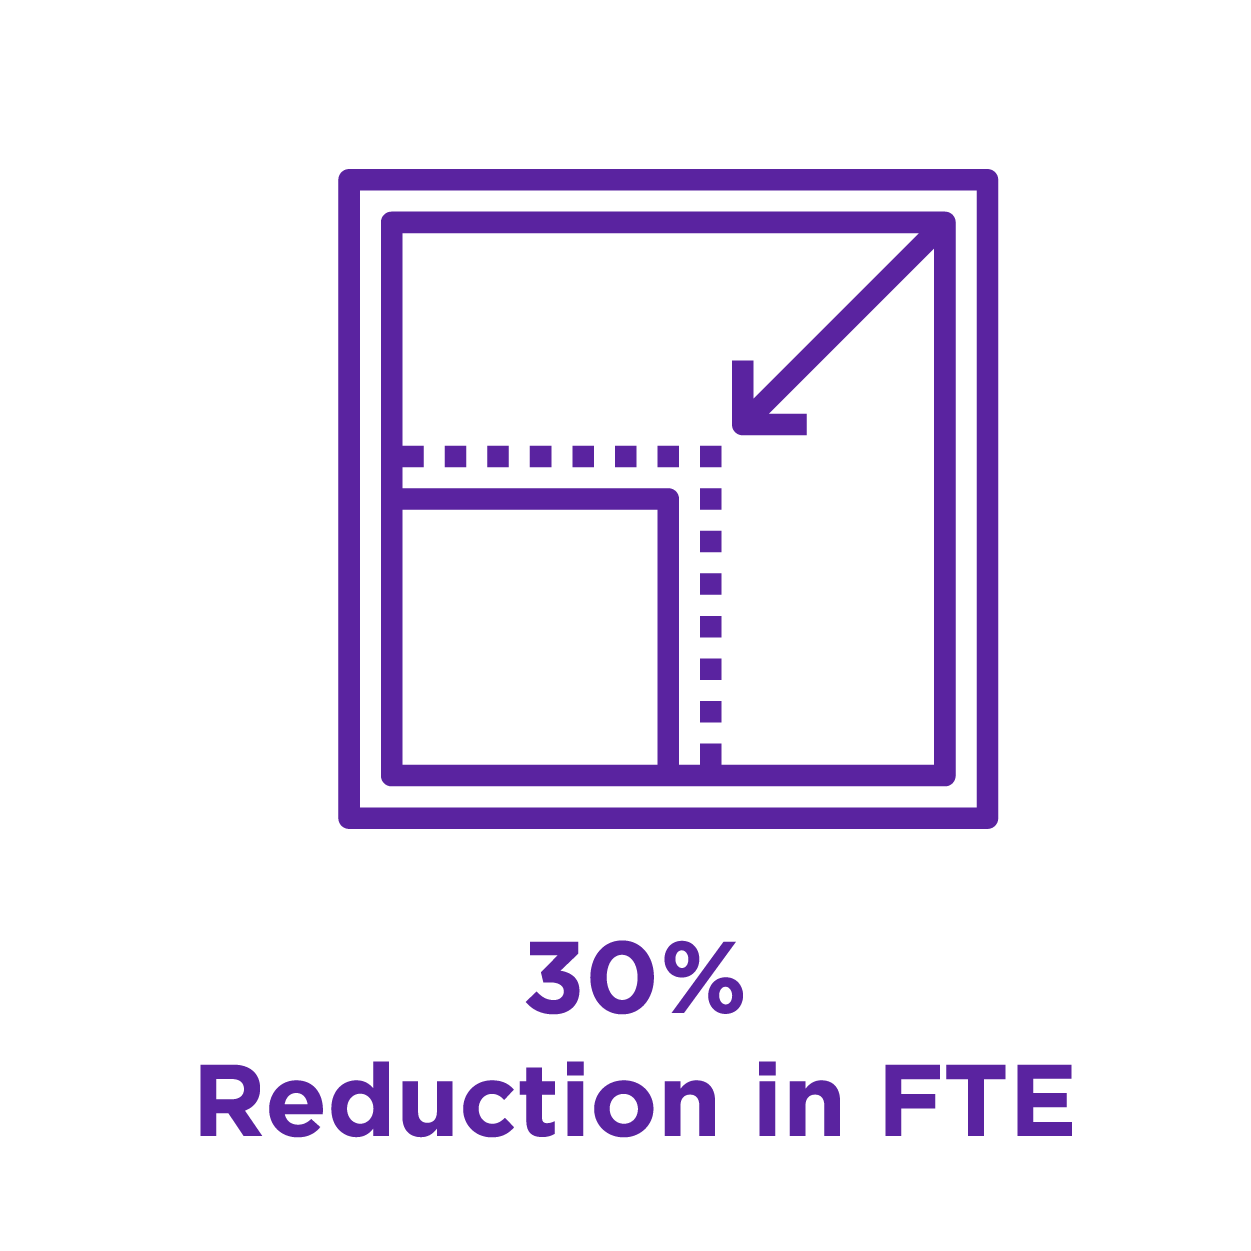 Reduction in FTE